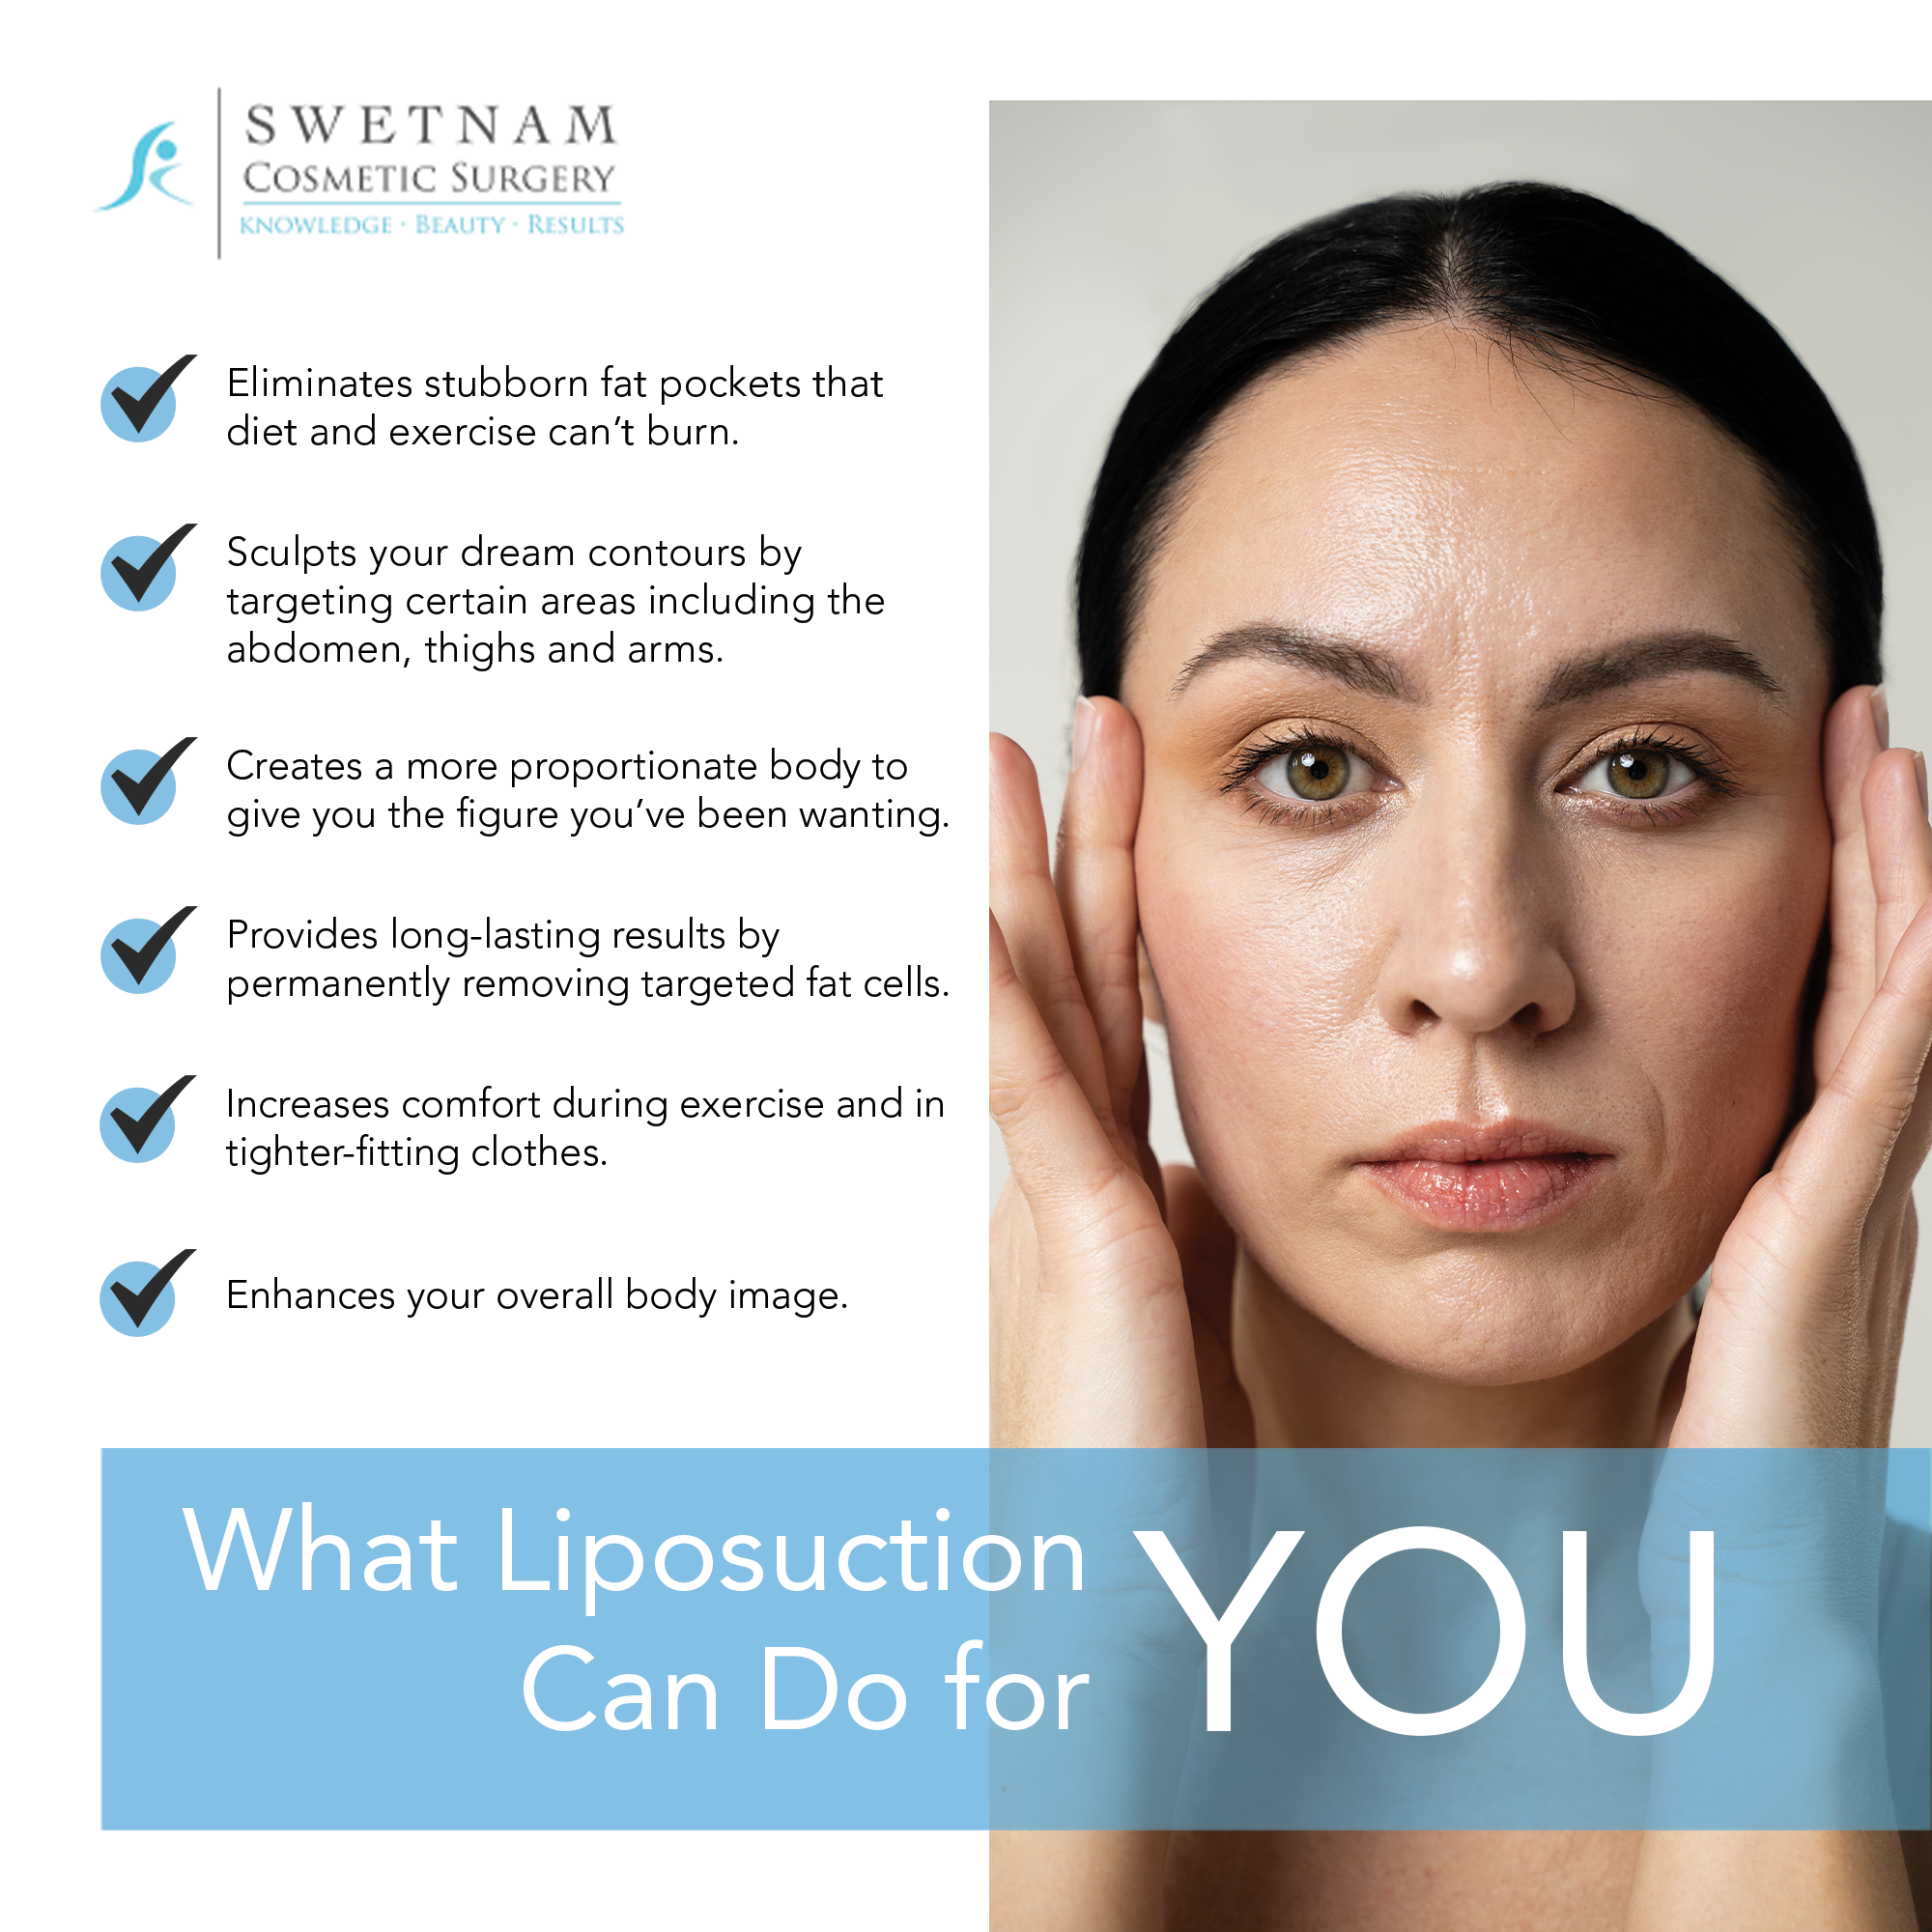 What Liposuction Can Do for You